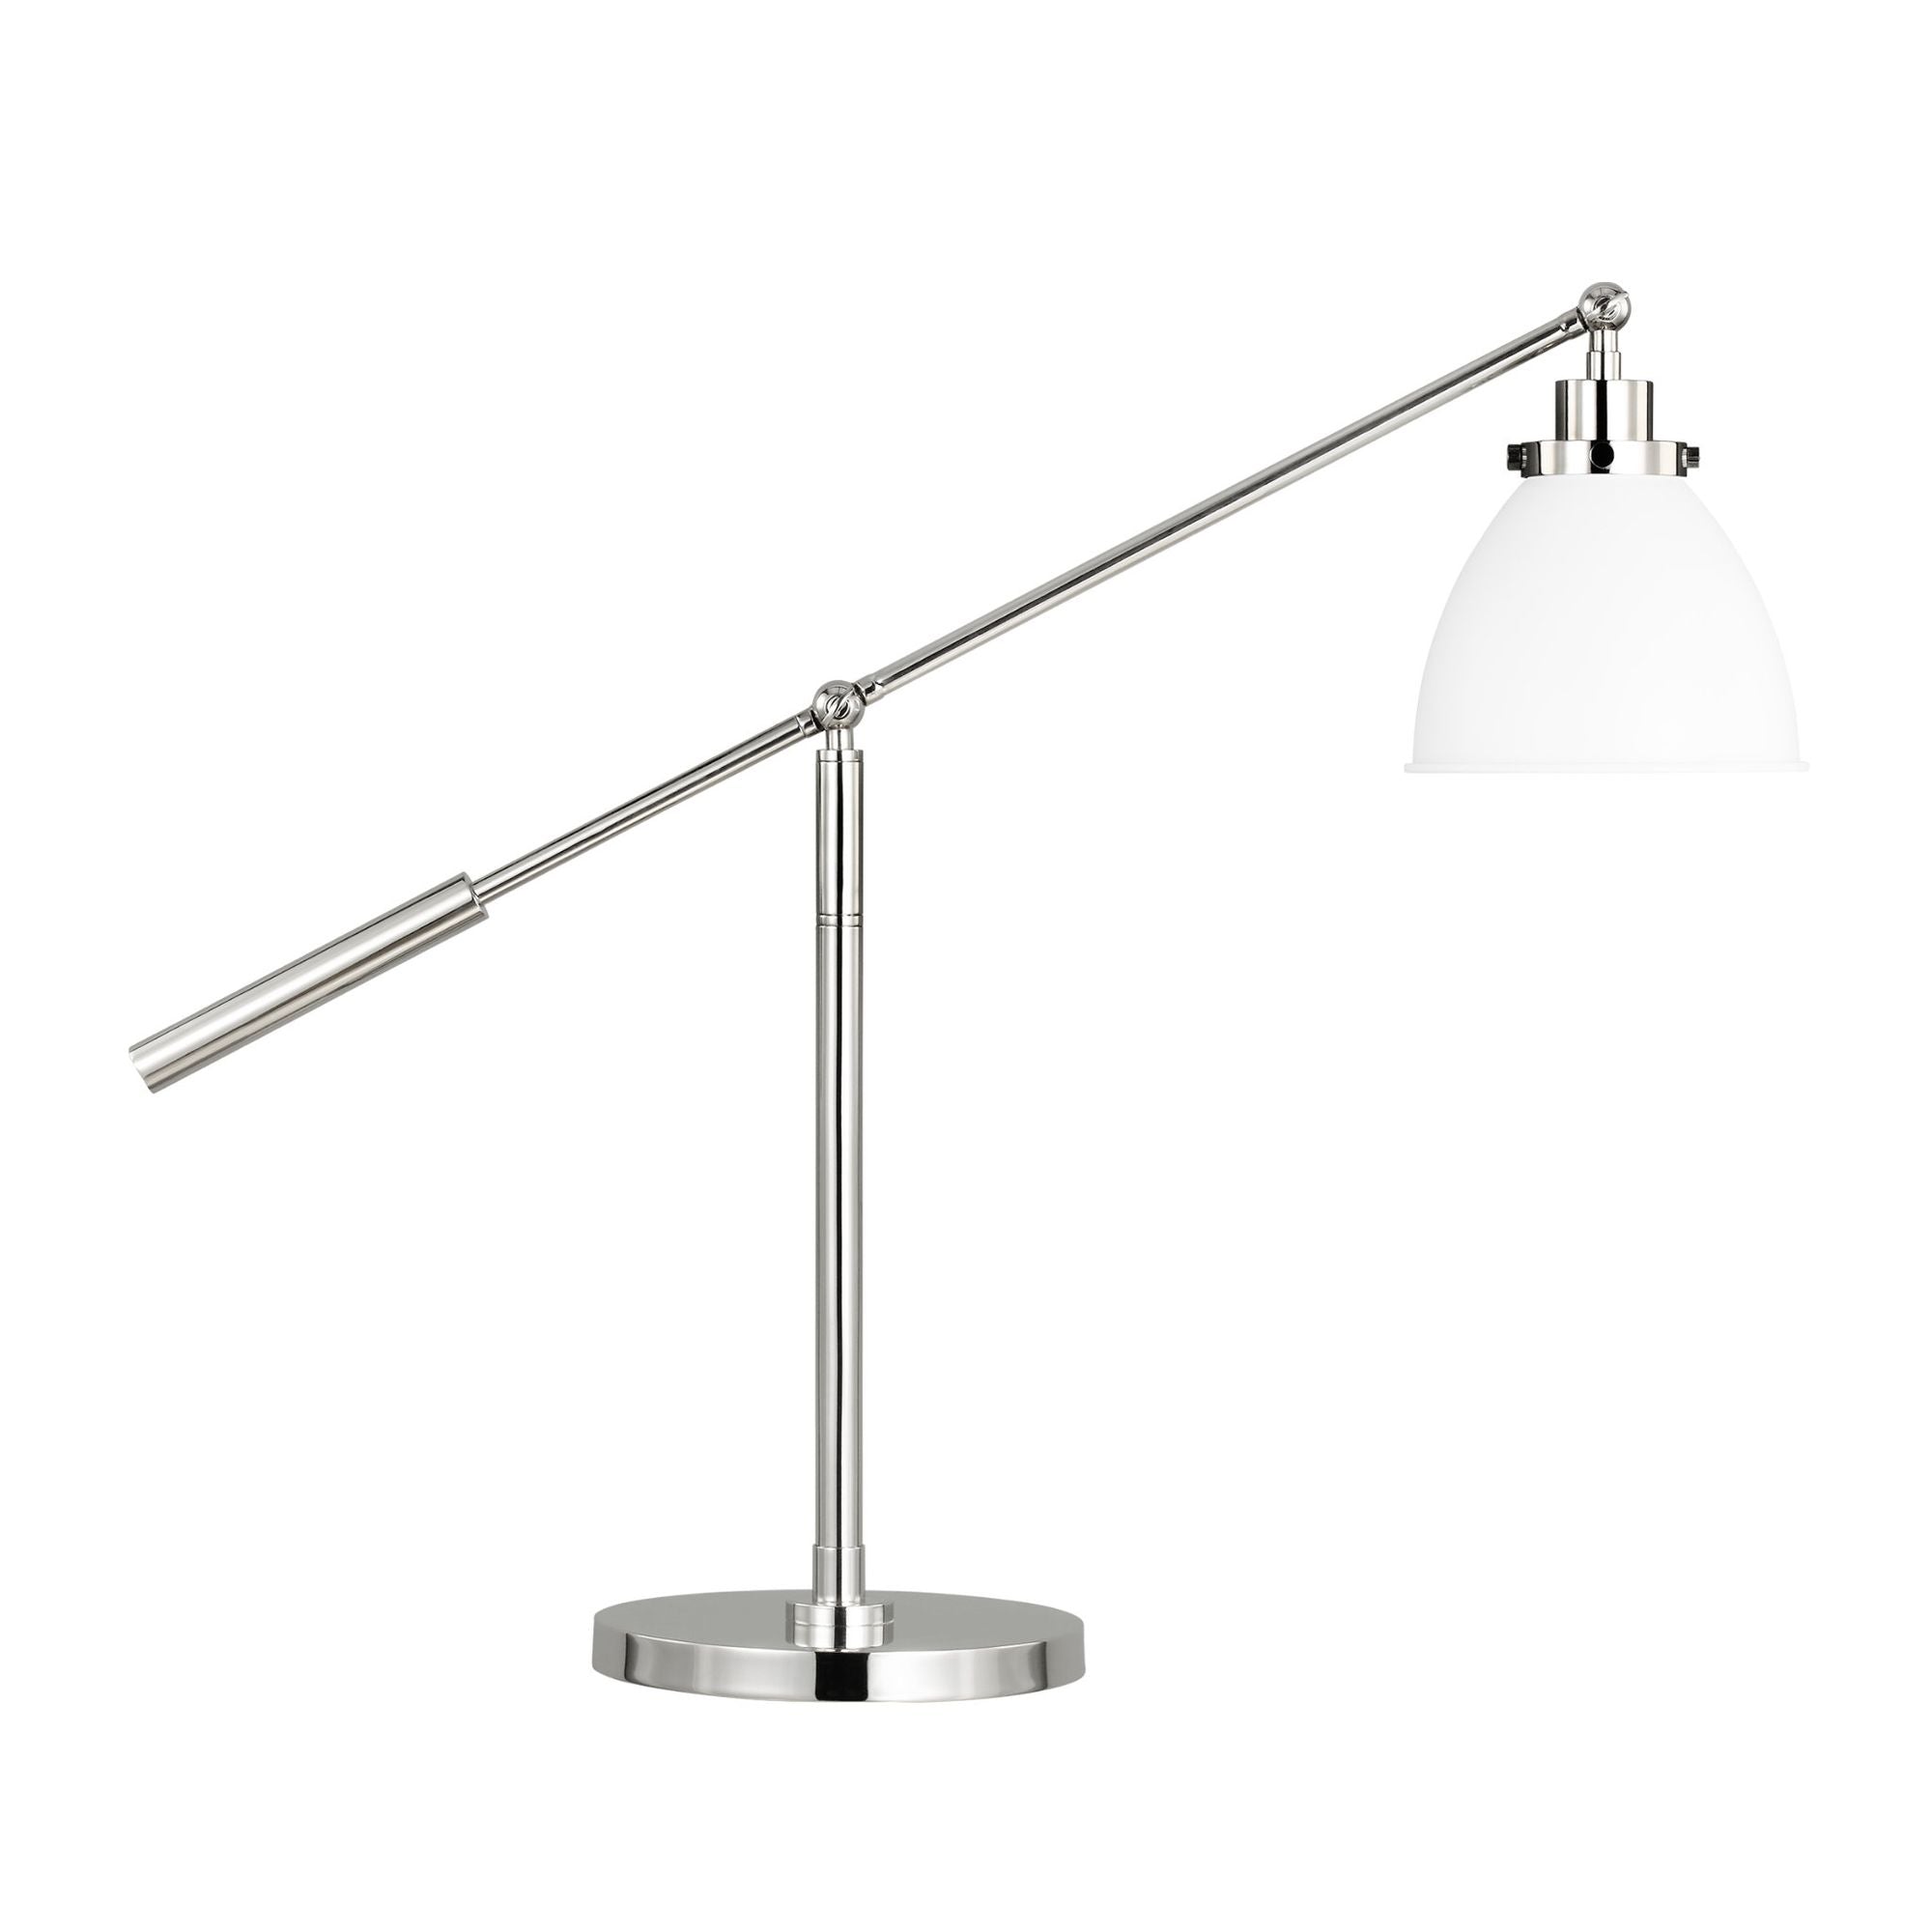 Chapman & Myers Wellfleet Dome Desk Lamp in Matte White and Polished Nickel